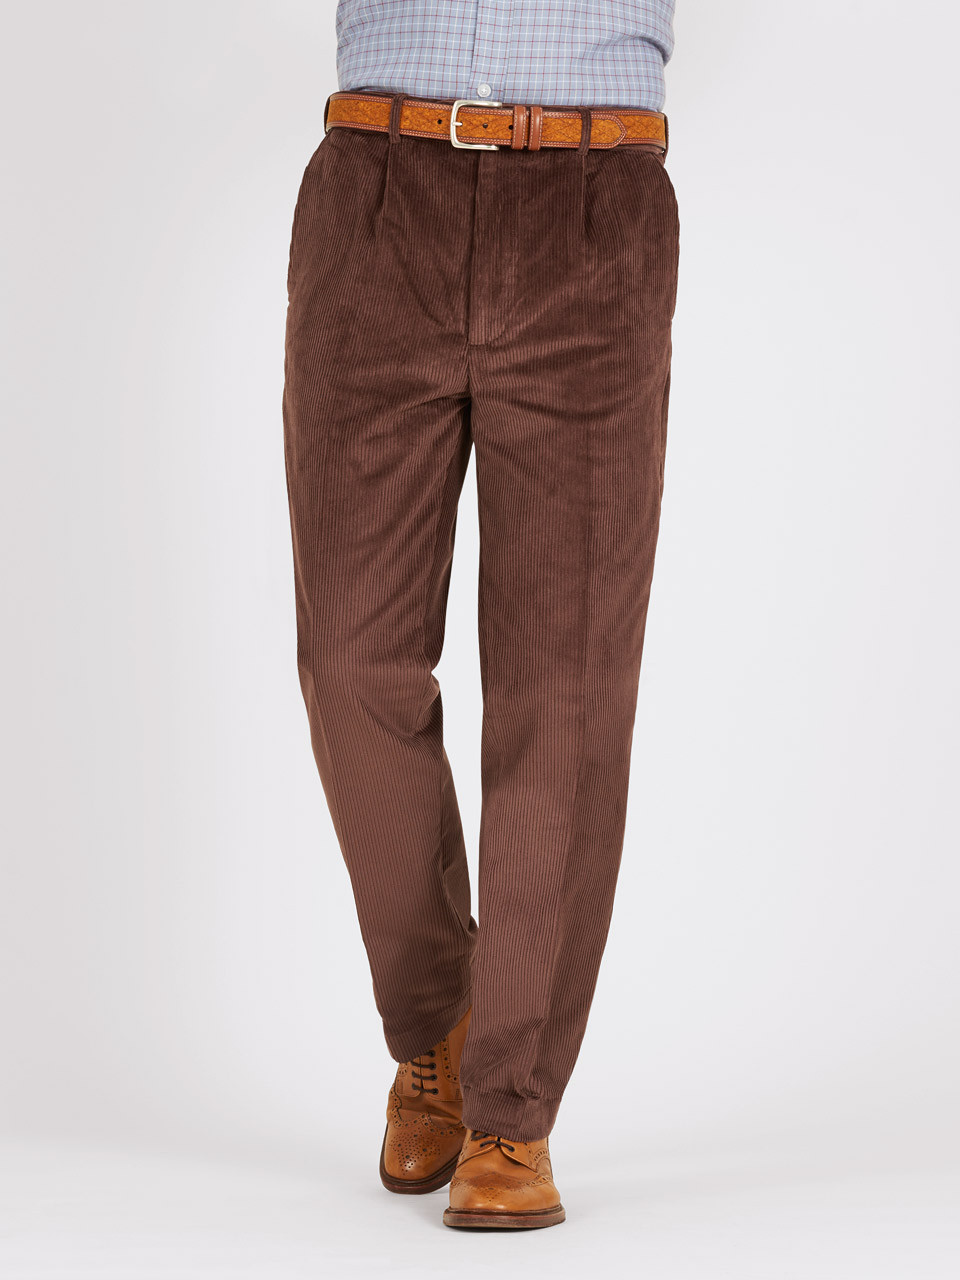 Camel corduroy trousers Soragna Capsule Collection  Made in Italy  Pini  Parma